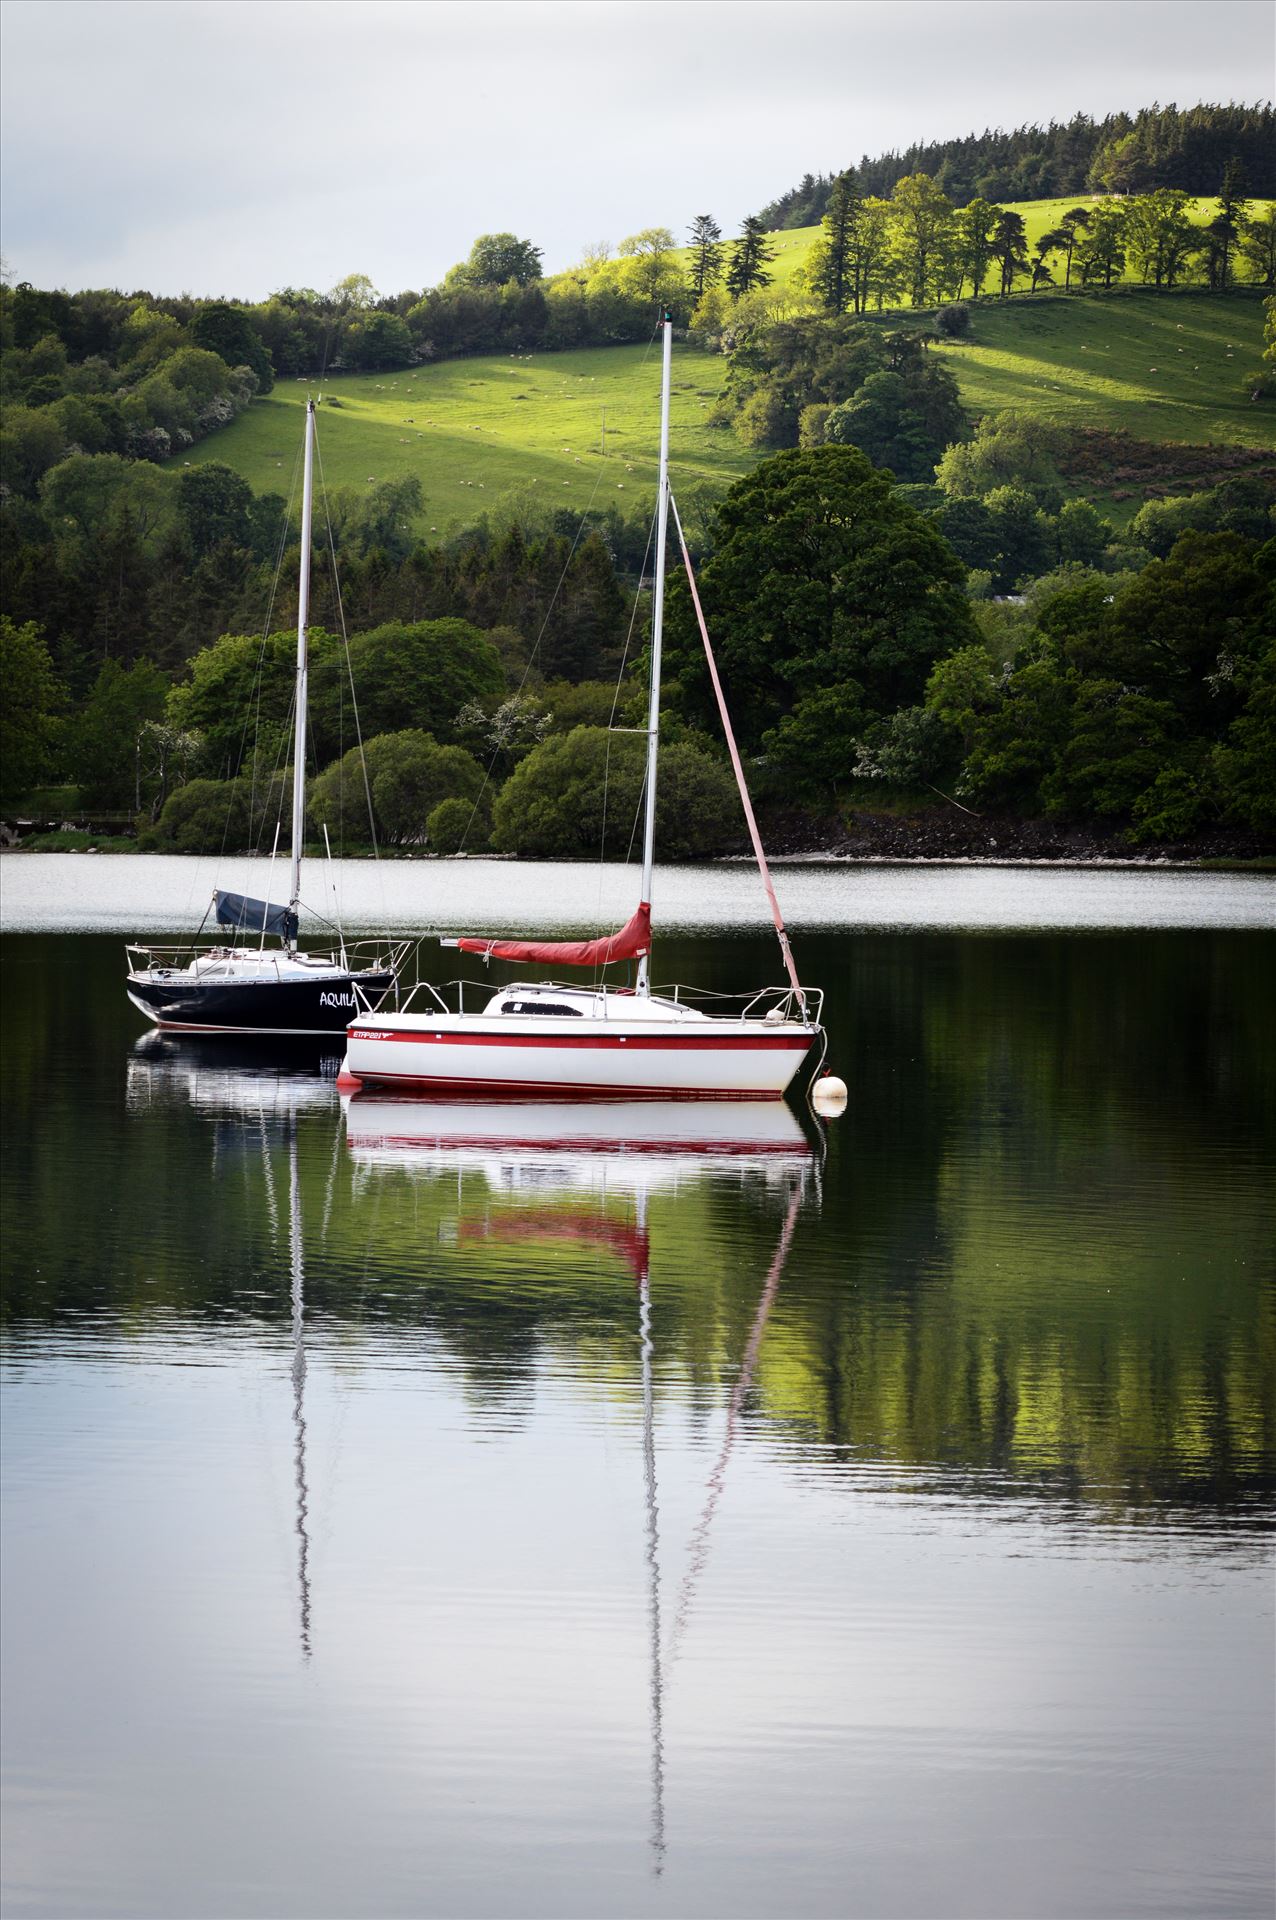 Reflections on Lake Ullswater - Reflections on a Lake by AJ Stoves Photography